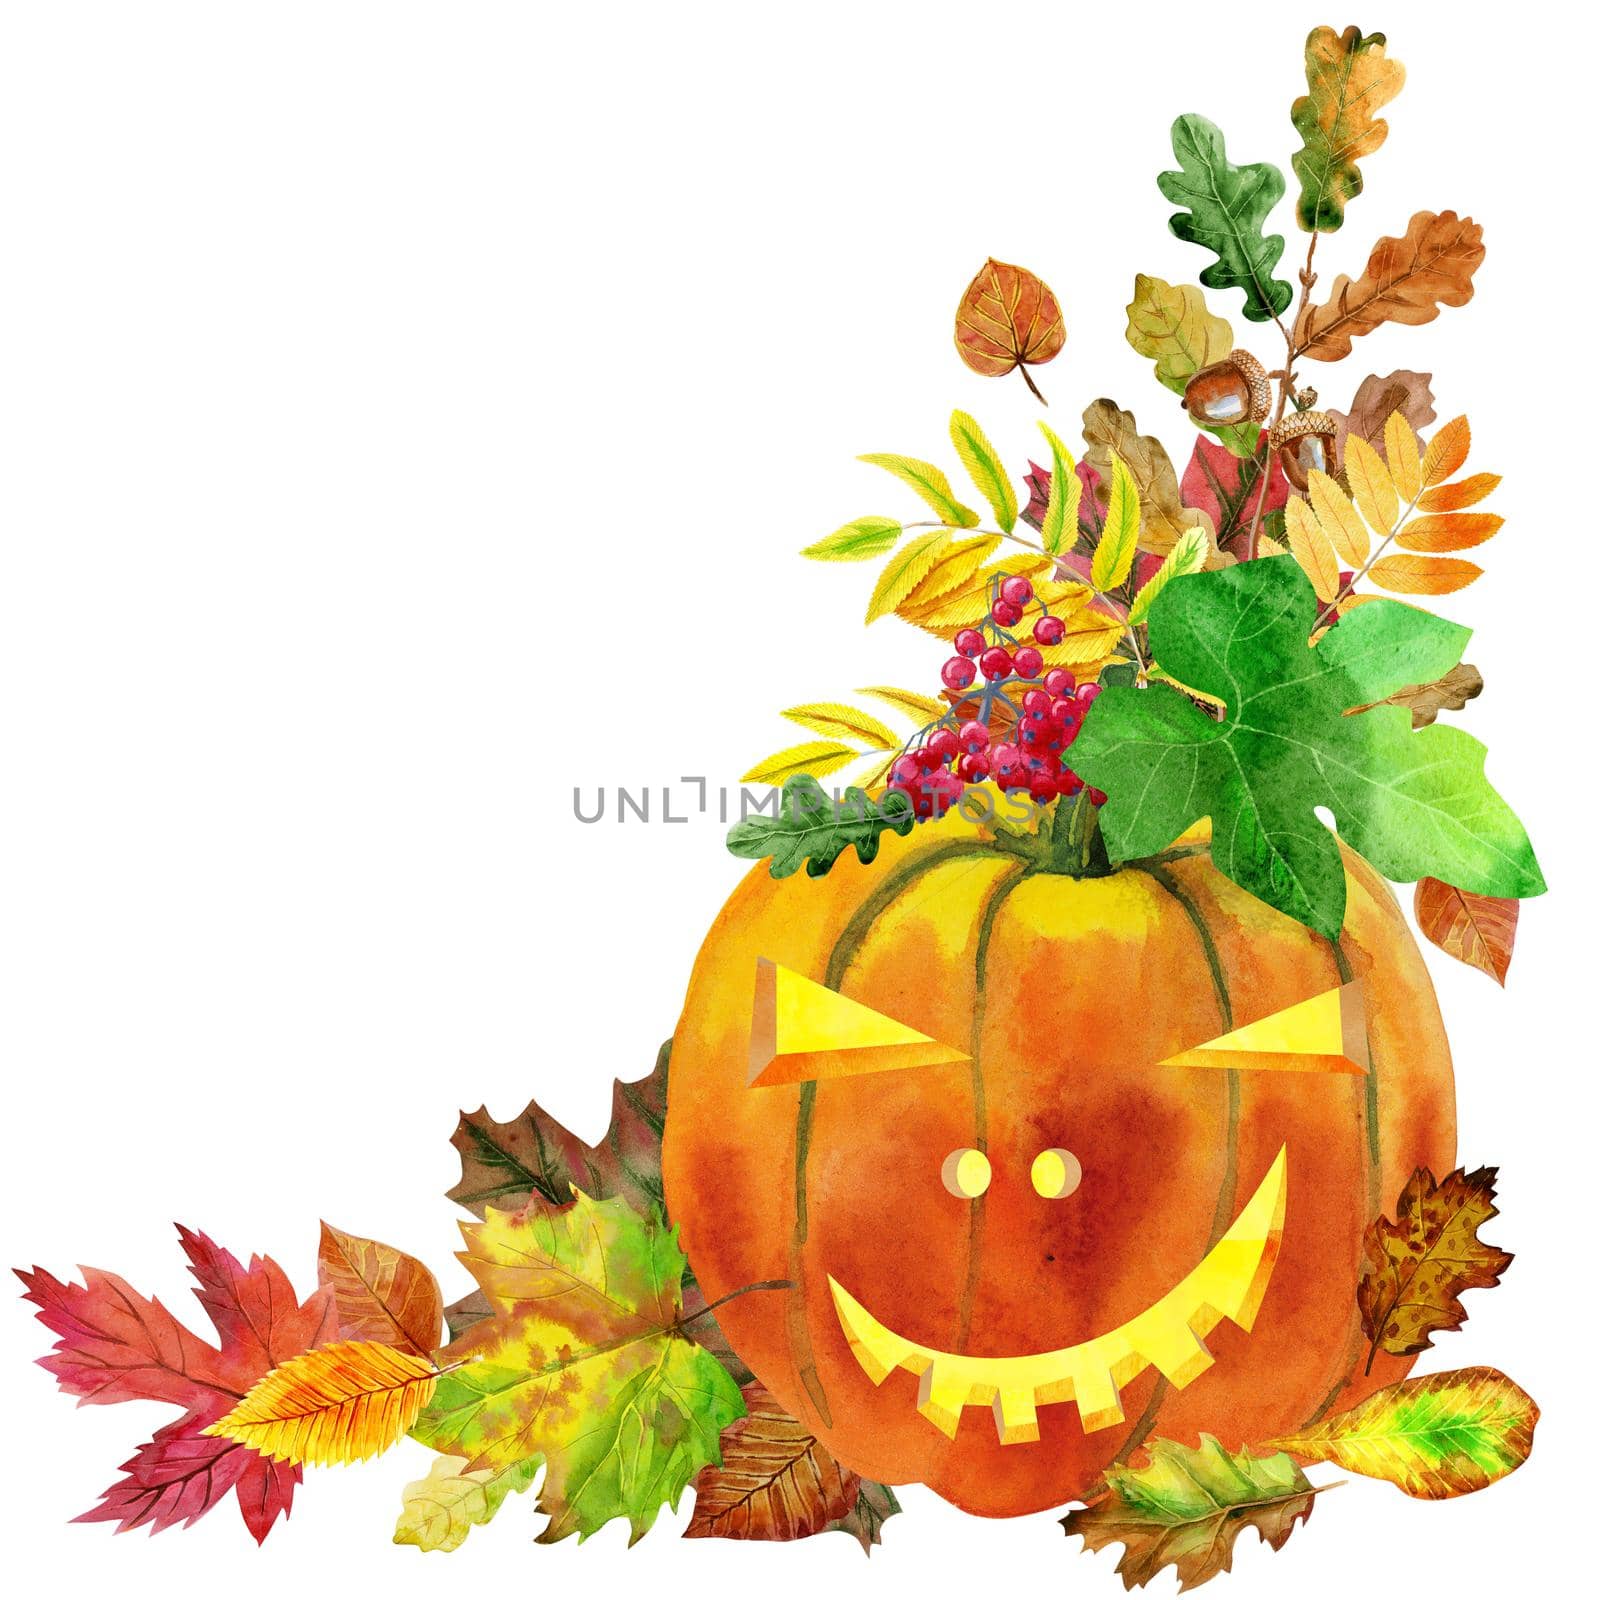 Watercolor halloween pumpkin. Hand painted carved faces pumpkins with leaves. Holiday illustration for design, print or background